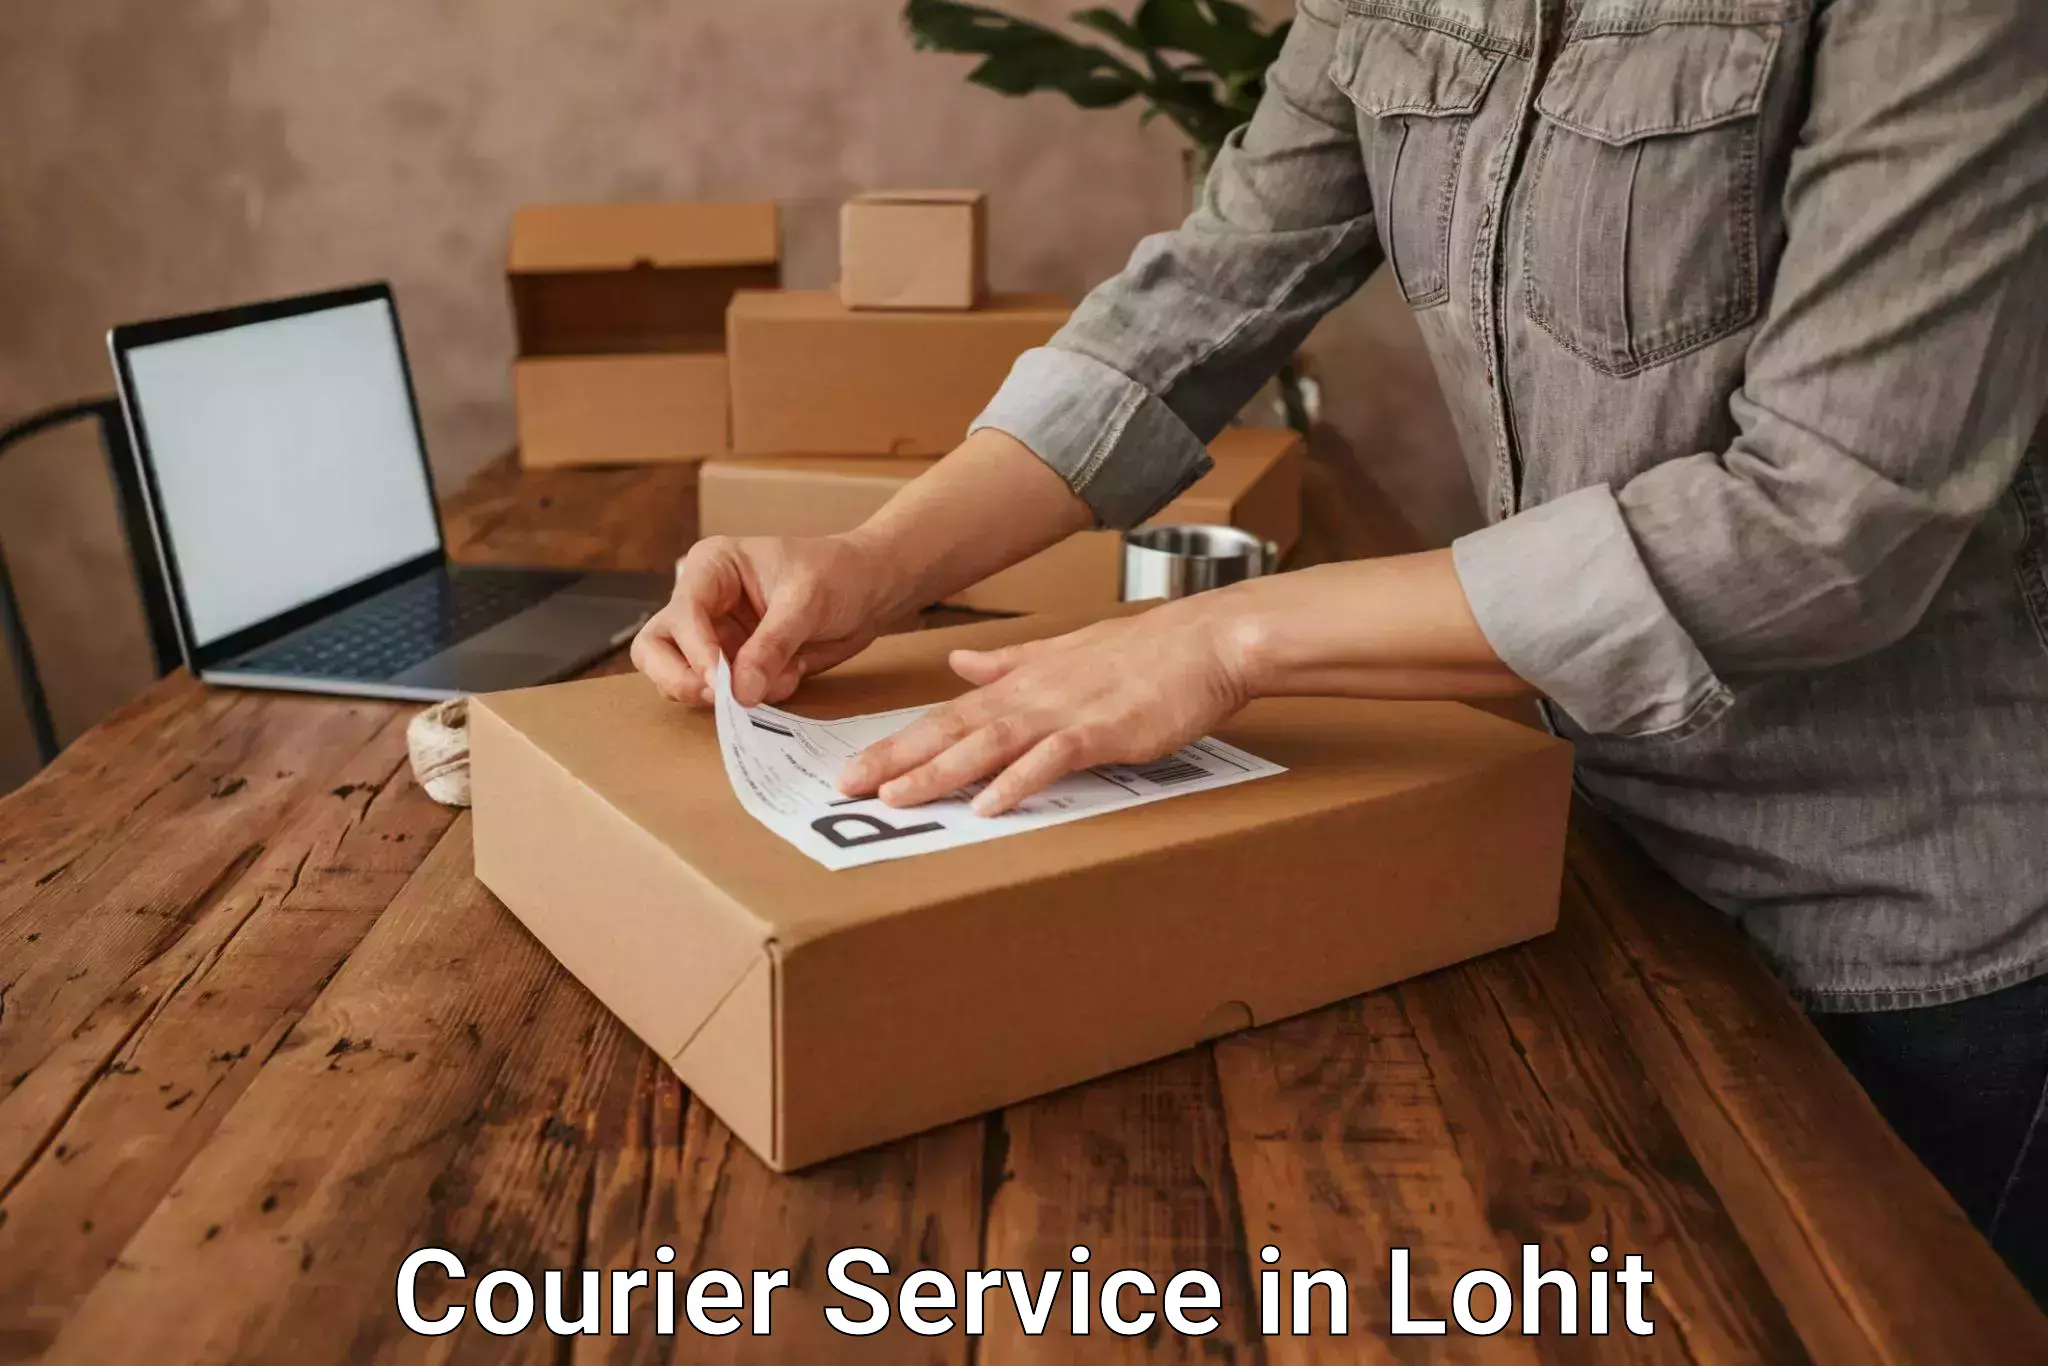 Reliable parcel services in Lohit